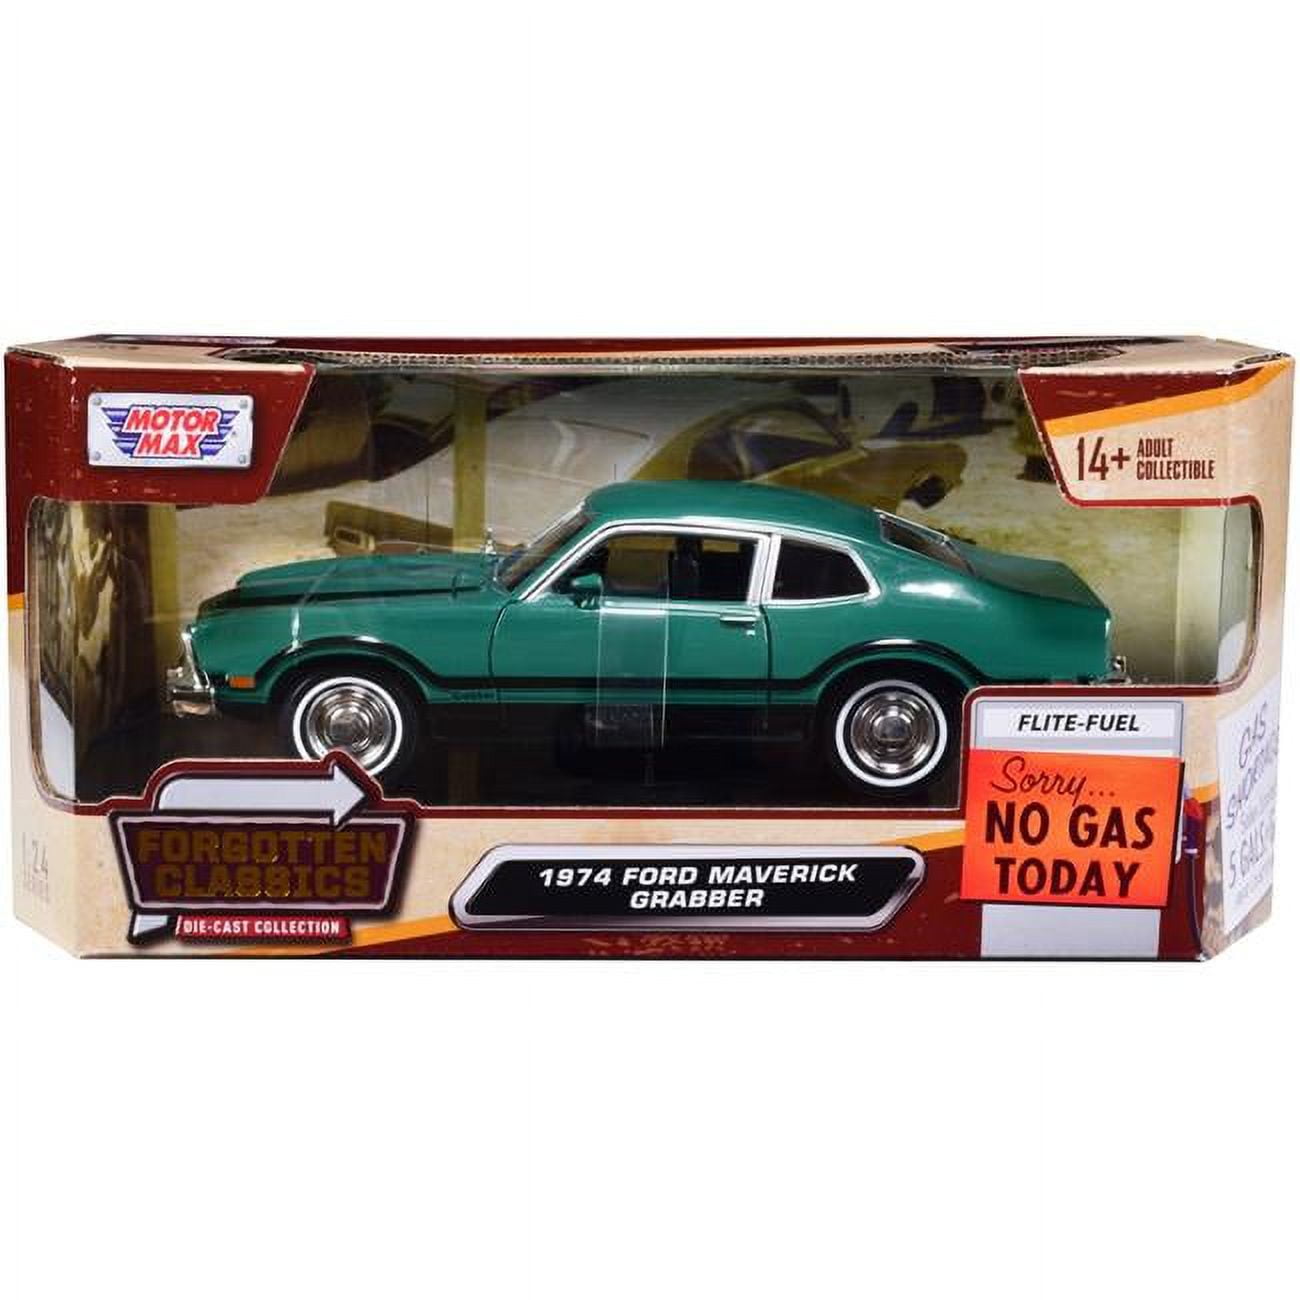 73332grn Green with Black Stripes Forgotten Classics Series 1 by 24 Scale Diecast Model Car for 1974 Ford Maverick Grabber -  MOTORMAX